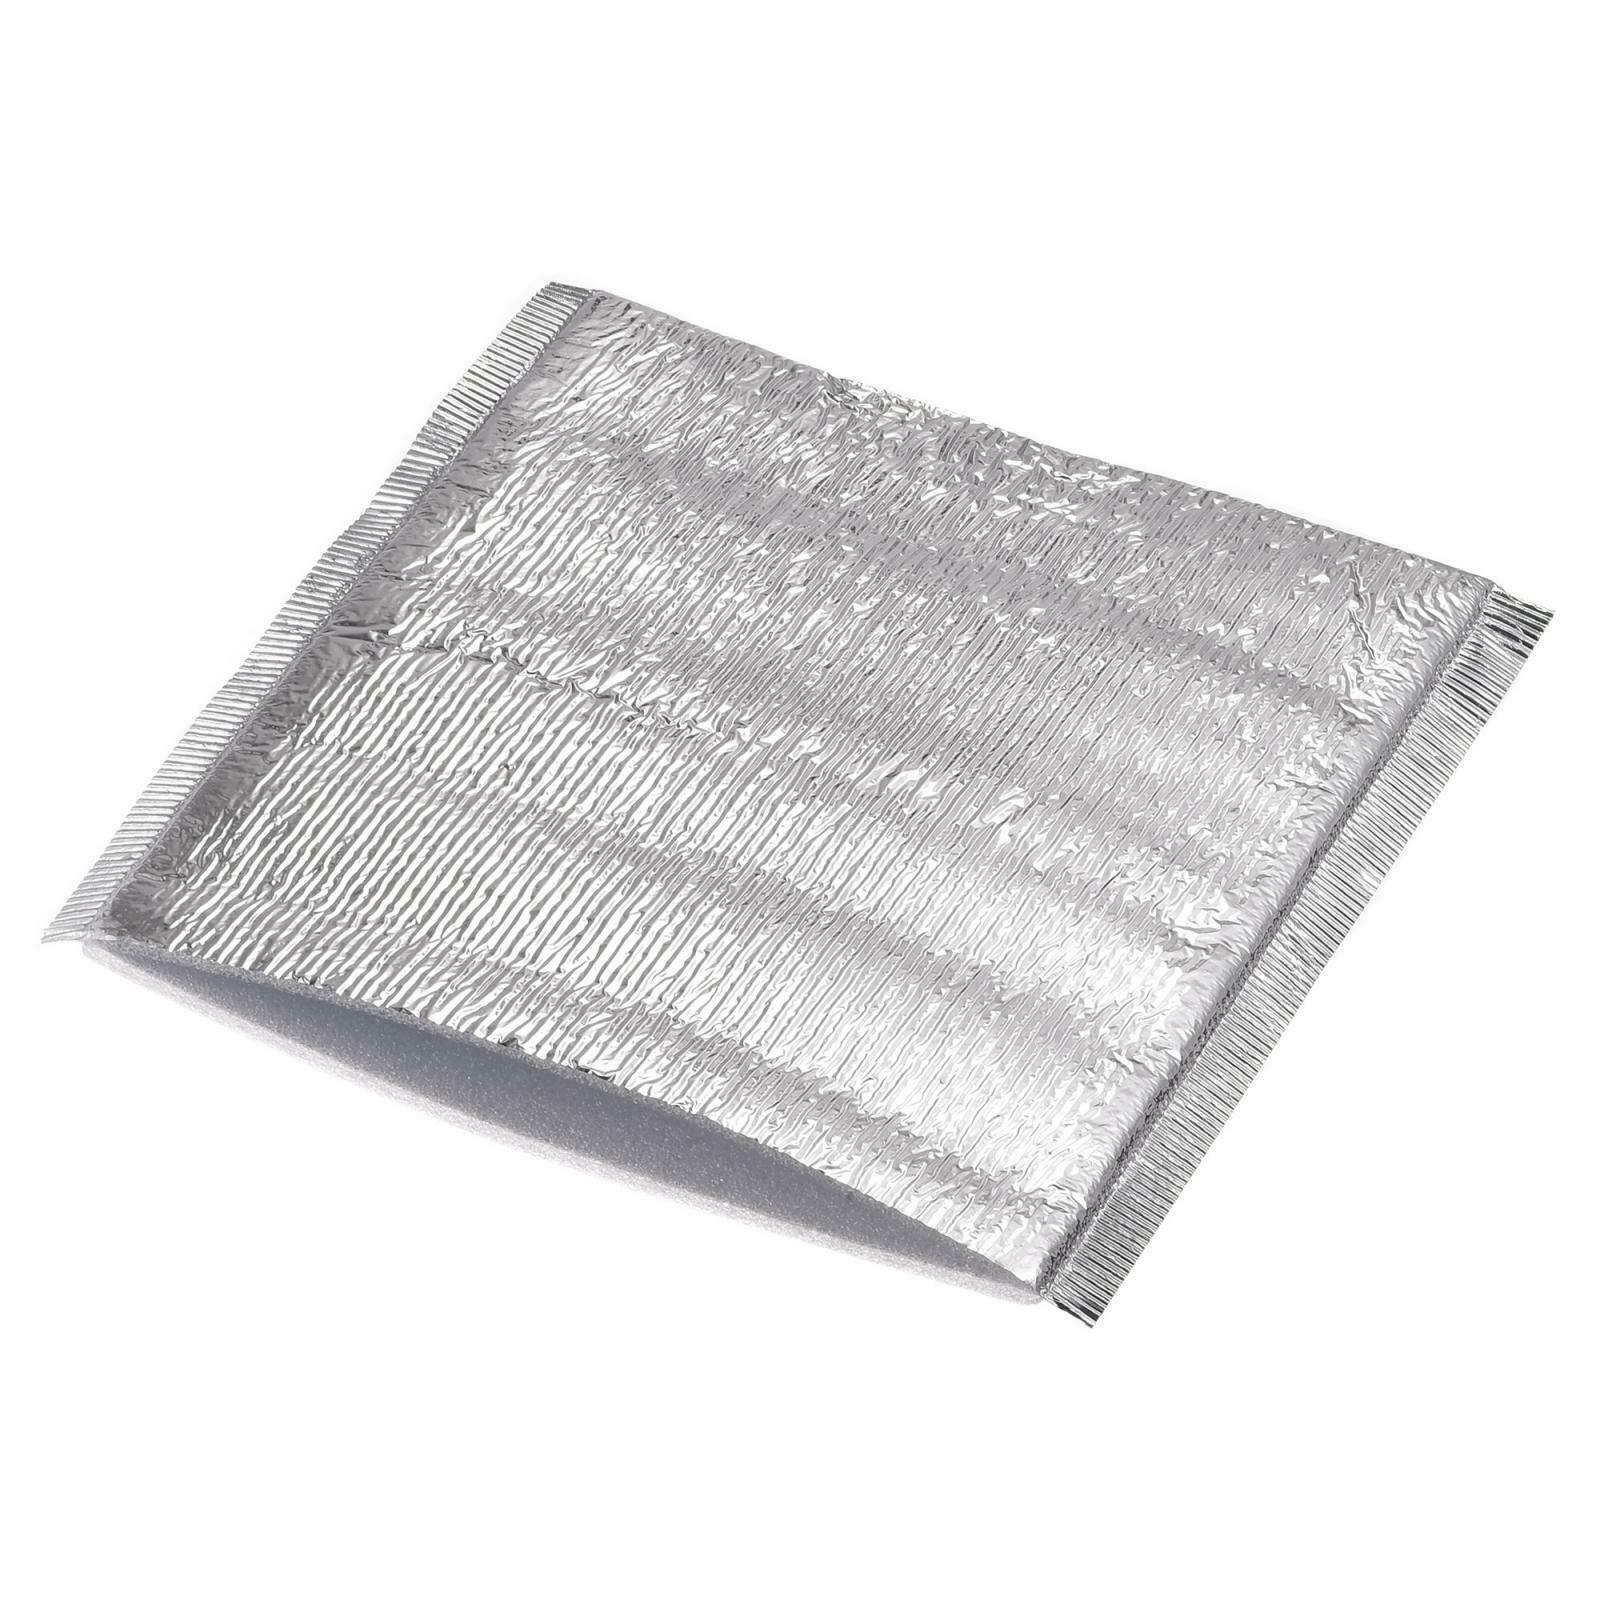 Reusable Thermal Insulation Bags 11.7x7.8in for Delivery Box Lining 50pcs